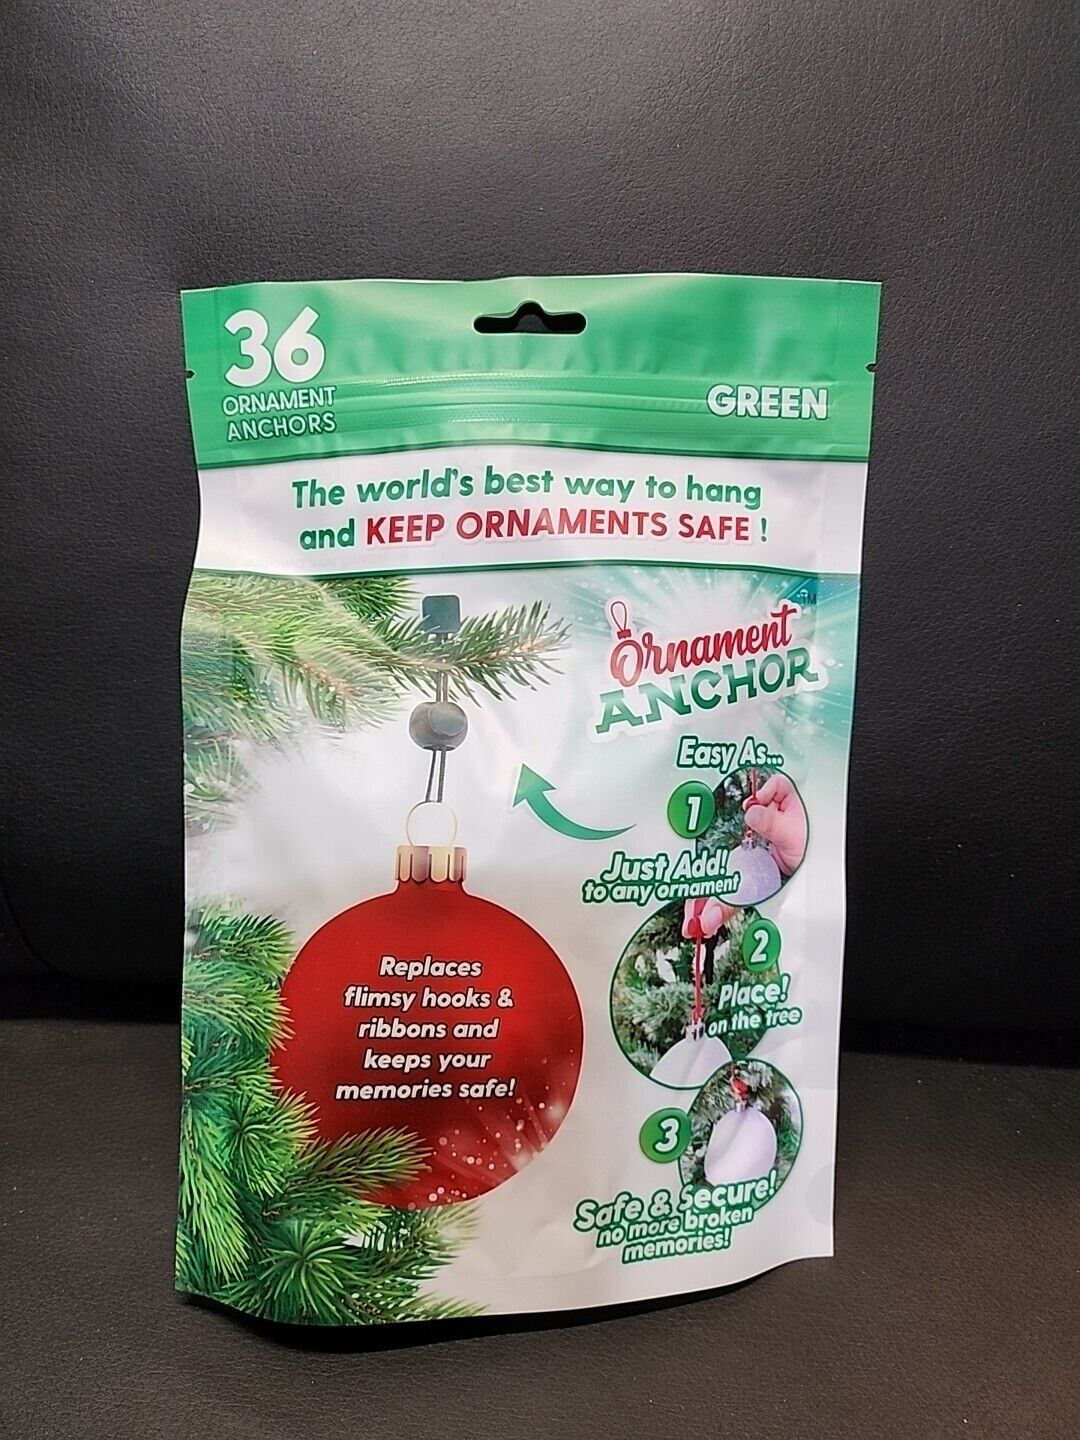 ORNAMENT ANCHOR Hooks  for Hanging Christmas Ornaments Green 36 New